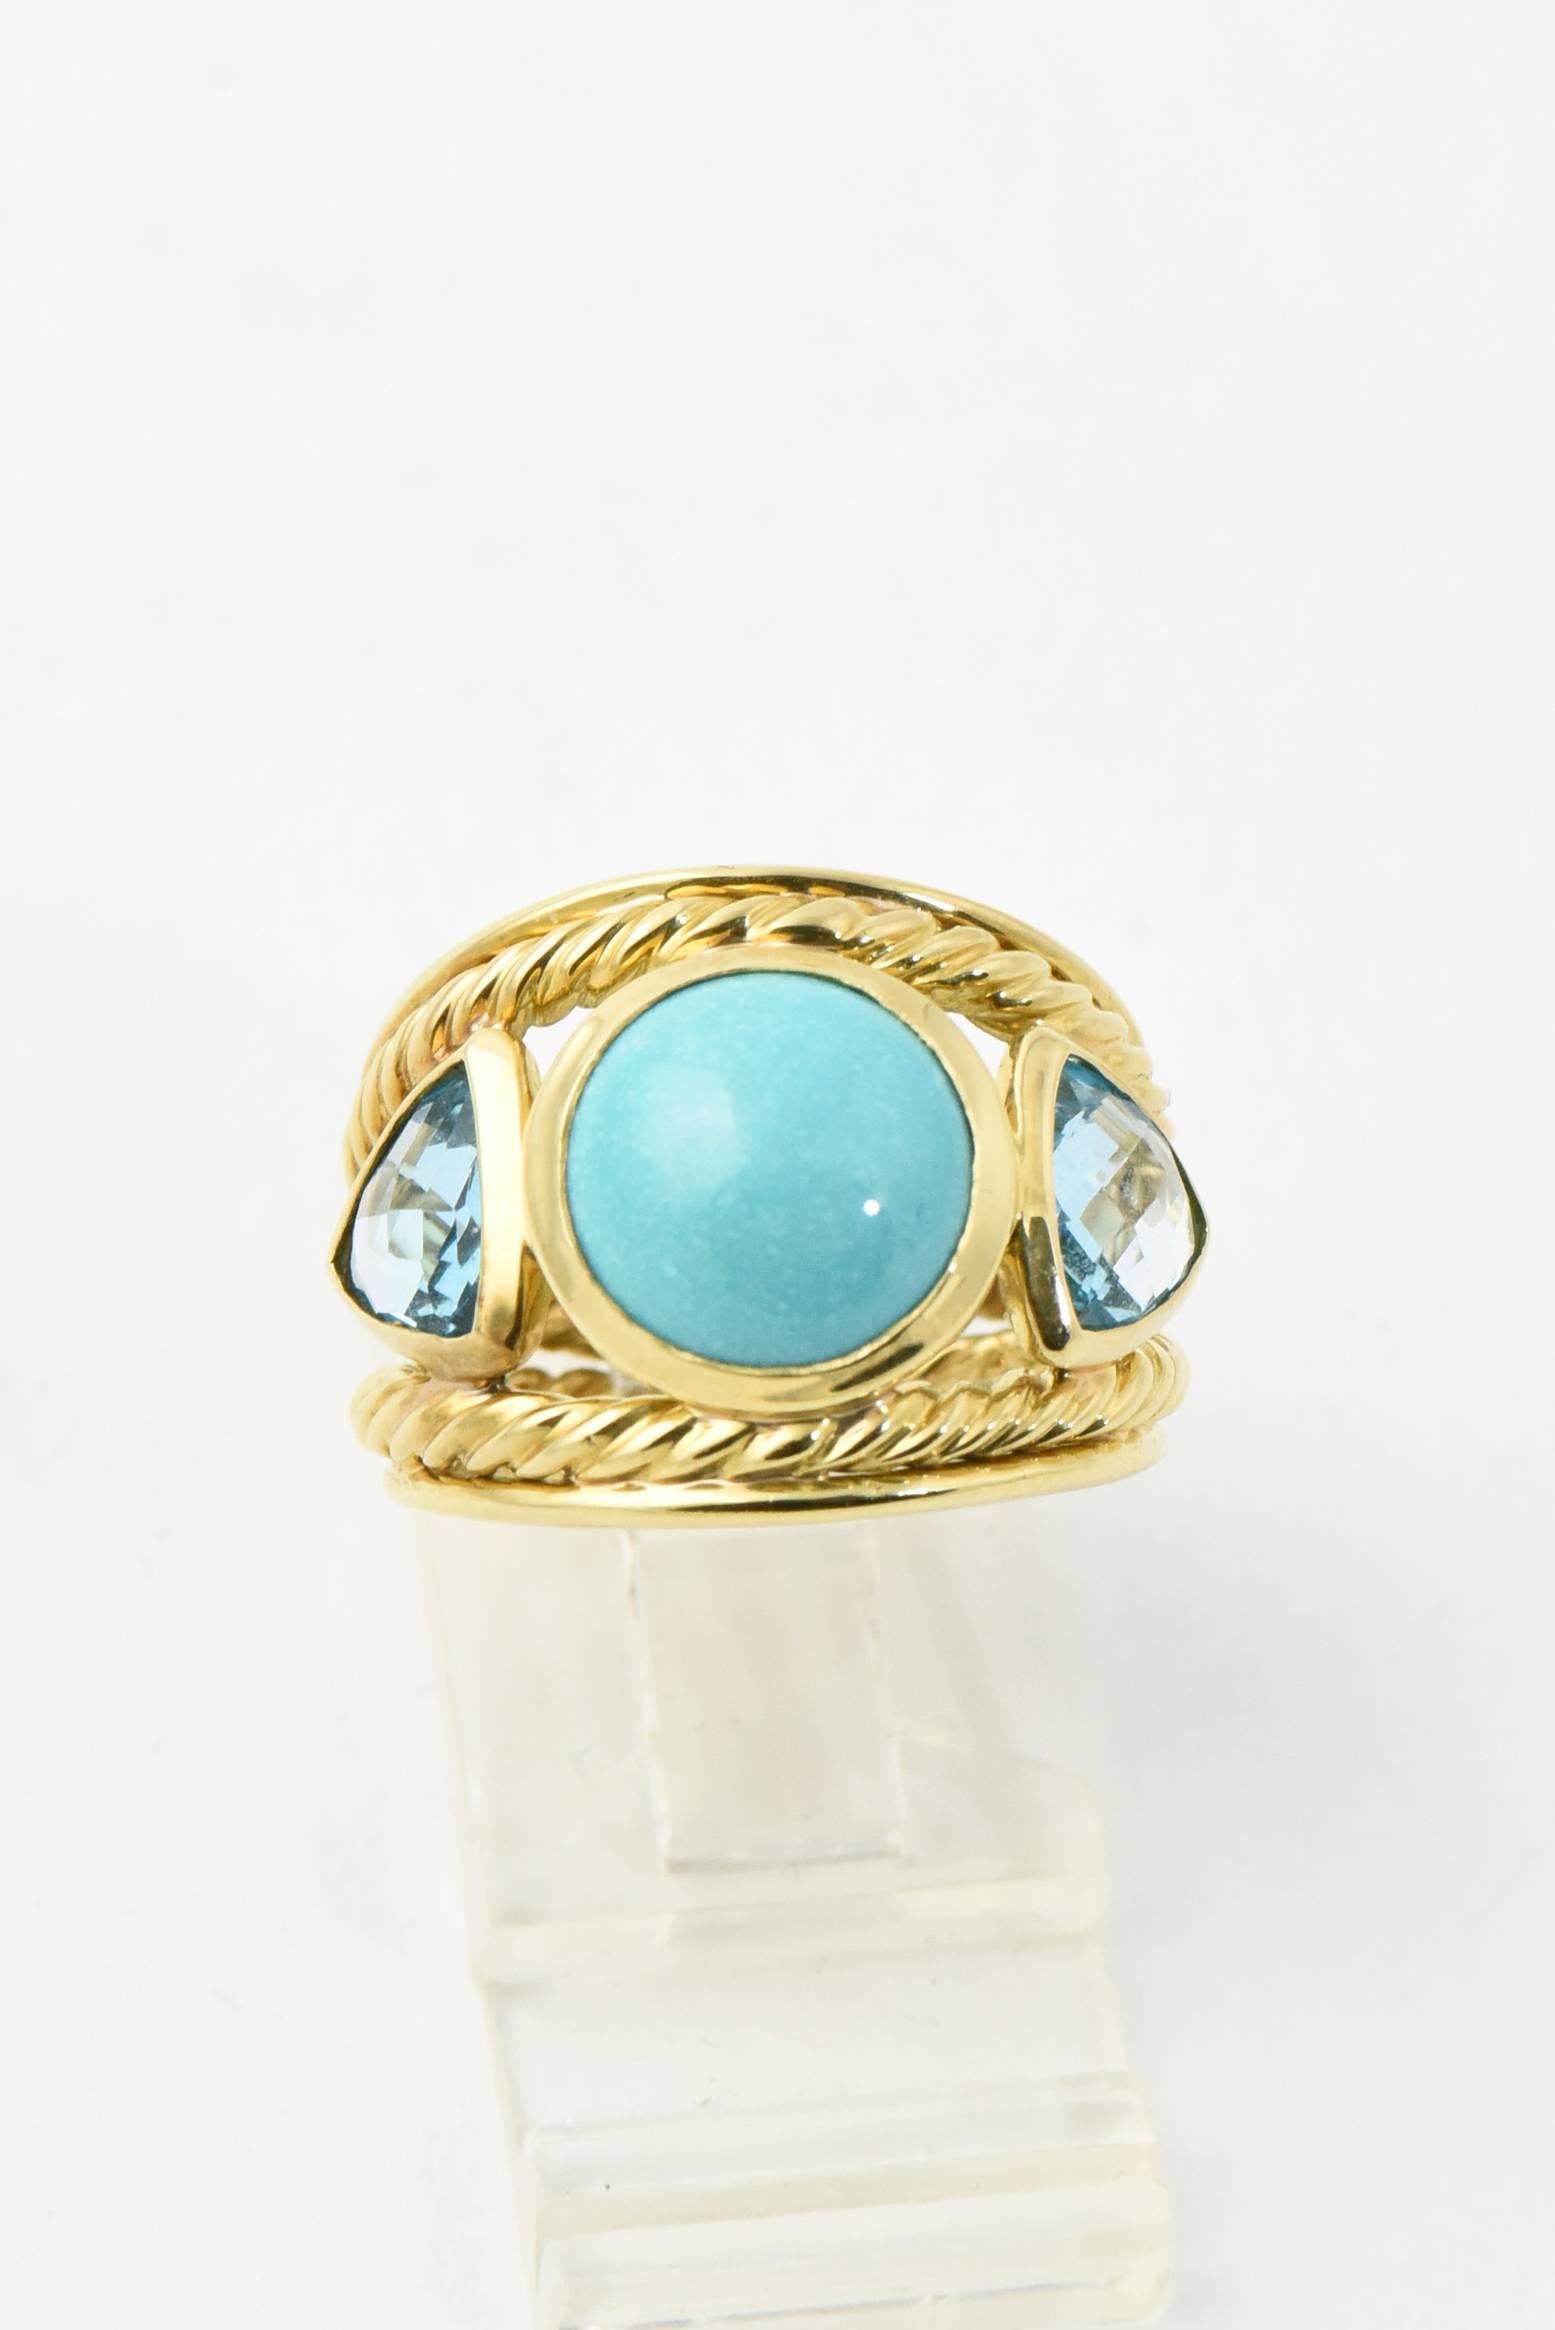 David Yurman 18K yellow gold three stone Renaissance ring with faceted blue topaz side stones and a turquoise cabochon in center. 
Marked 750 & Yurman Hallmark. 
US size: 5.